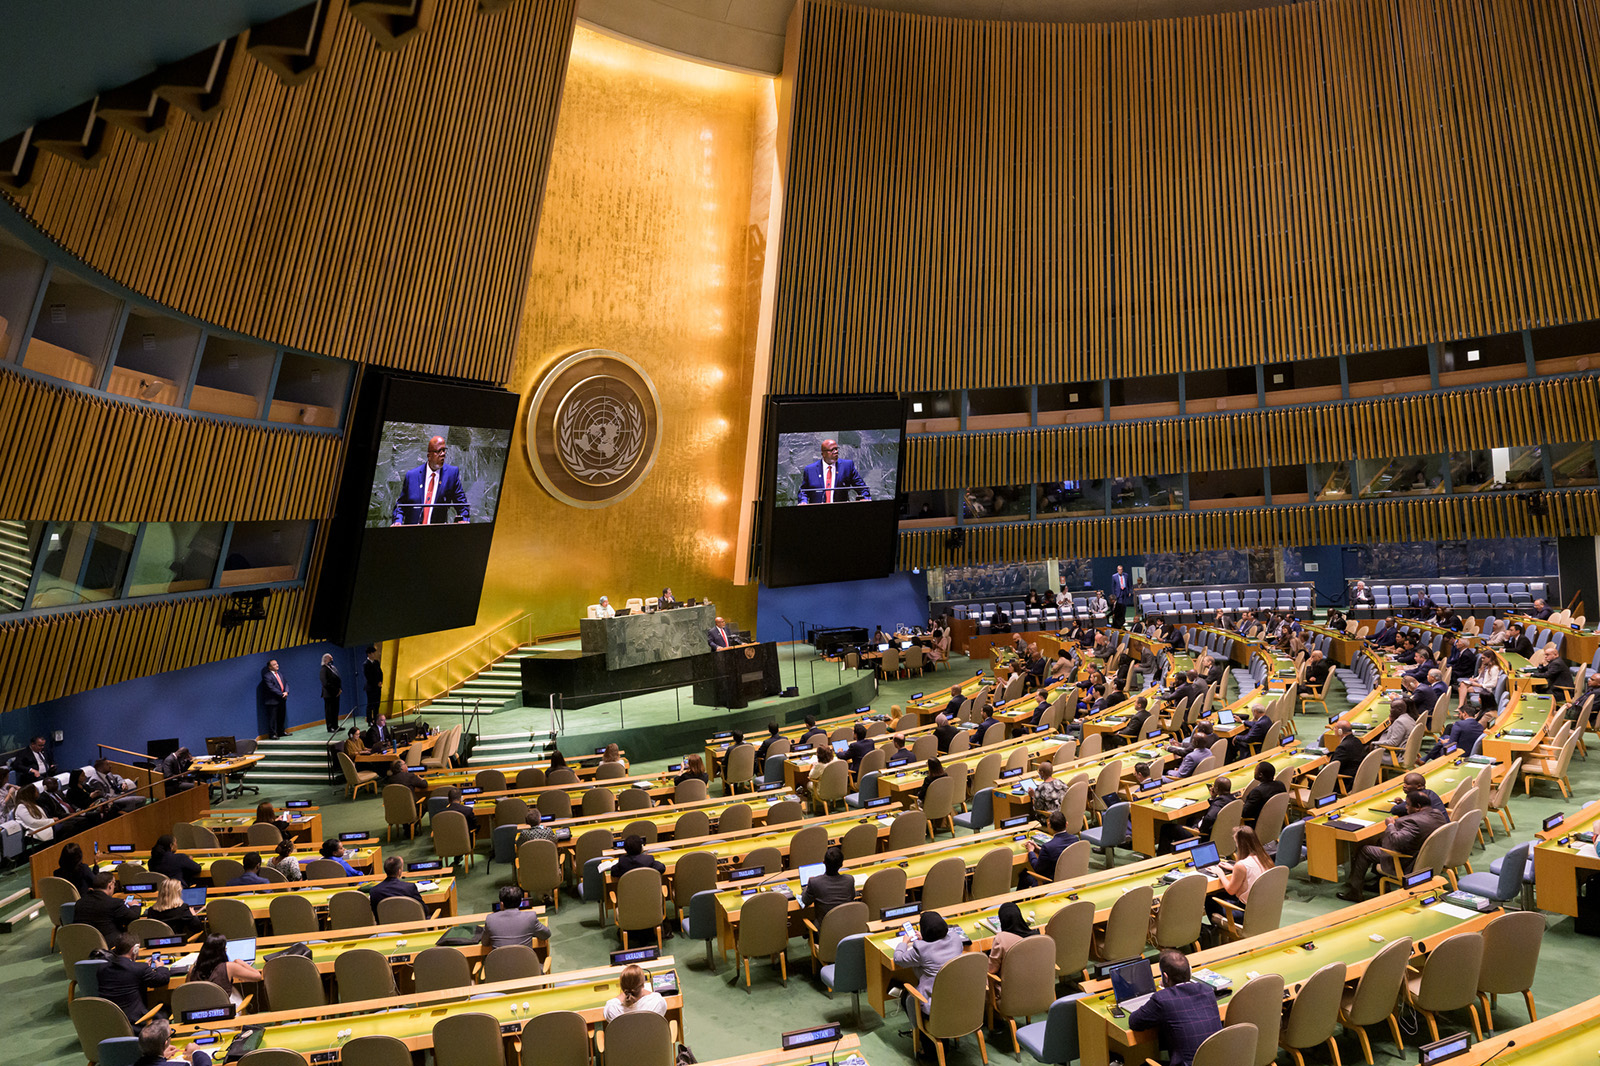 General Assembly hall with the President at the podium